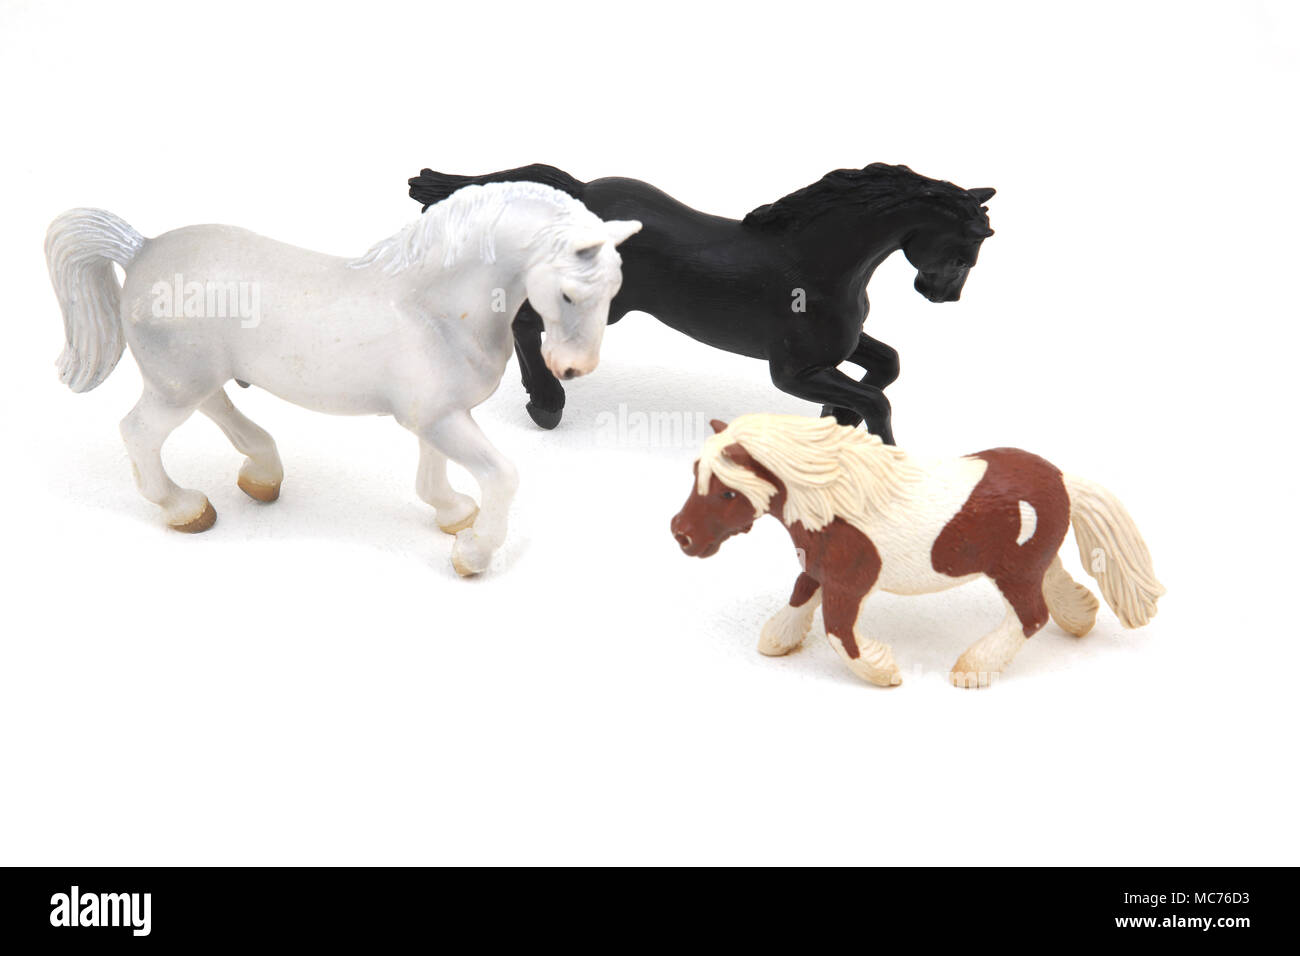 Schleich Horses and Pony Stock Photo